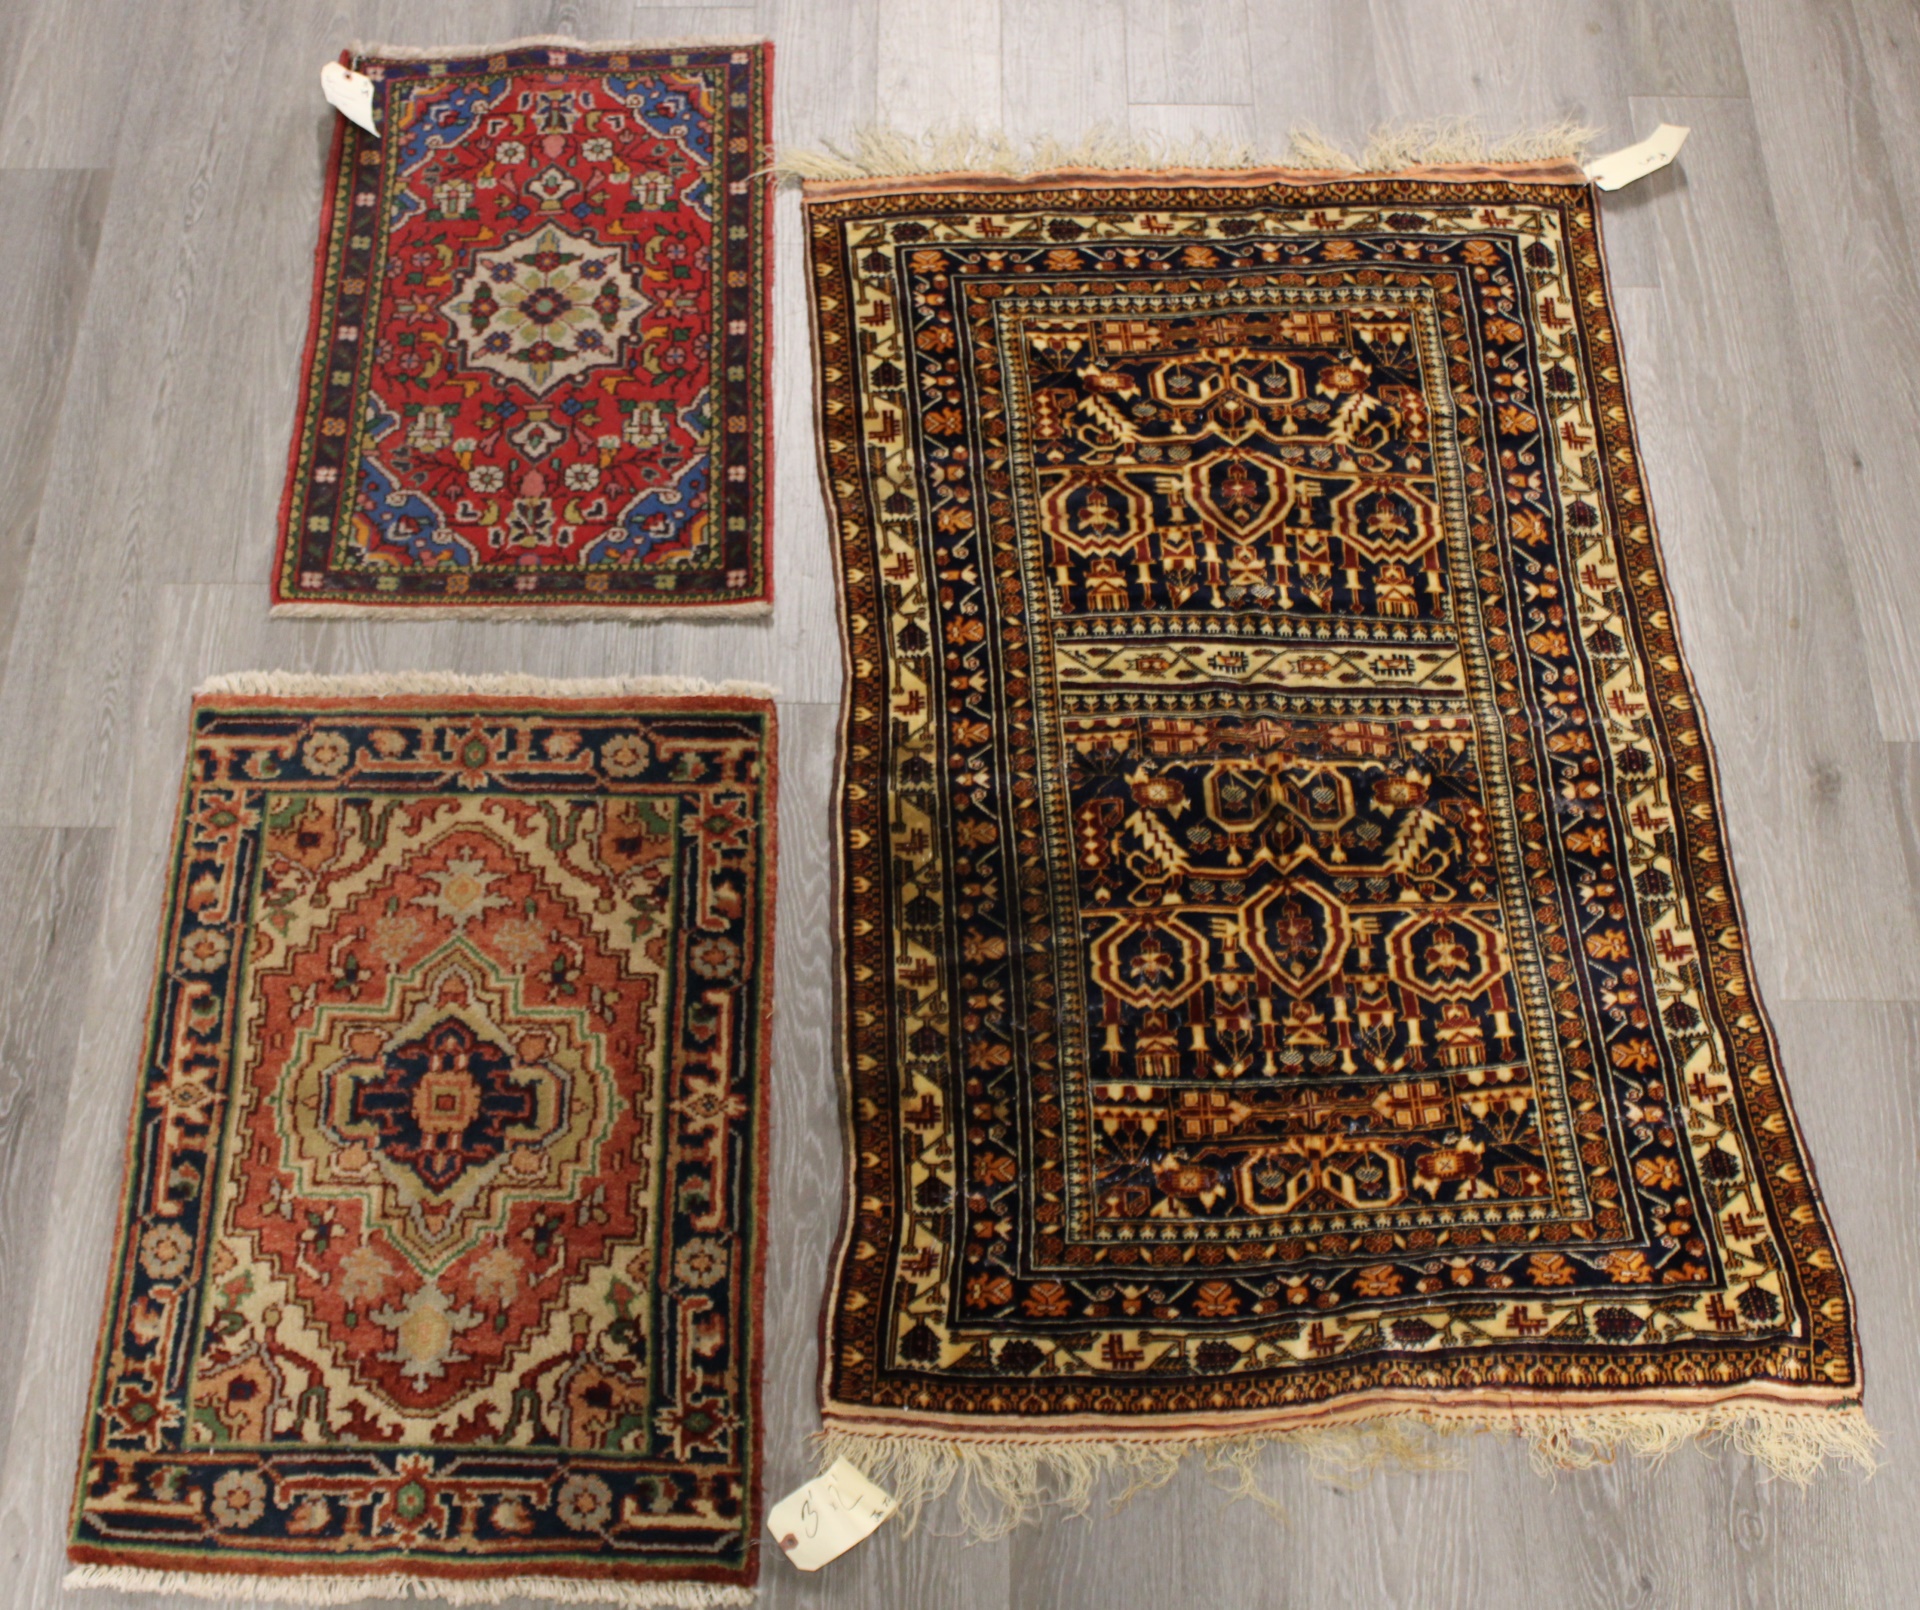 3 ANTIQUE AND FINELY HAND WOVEN